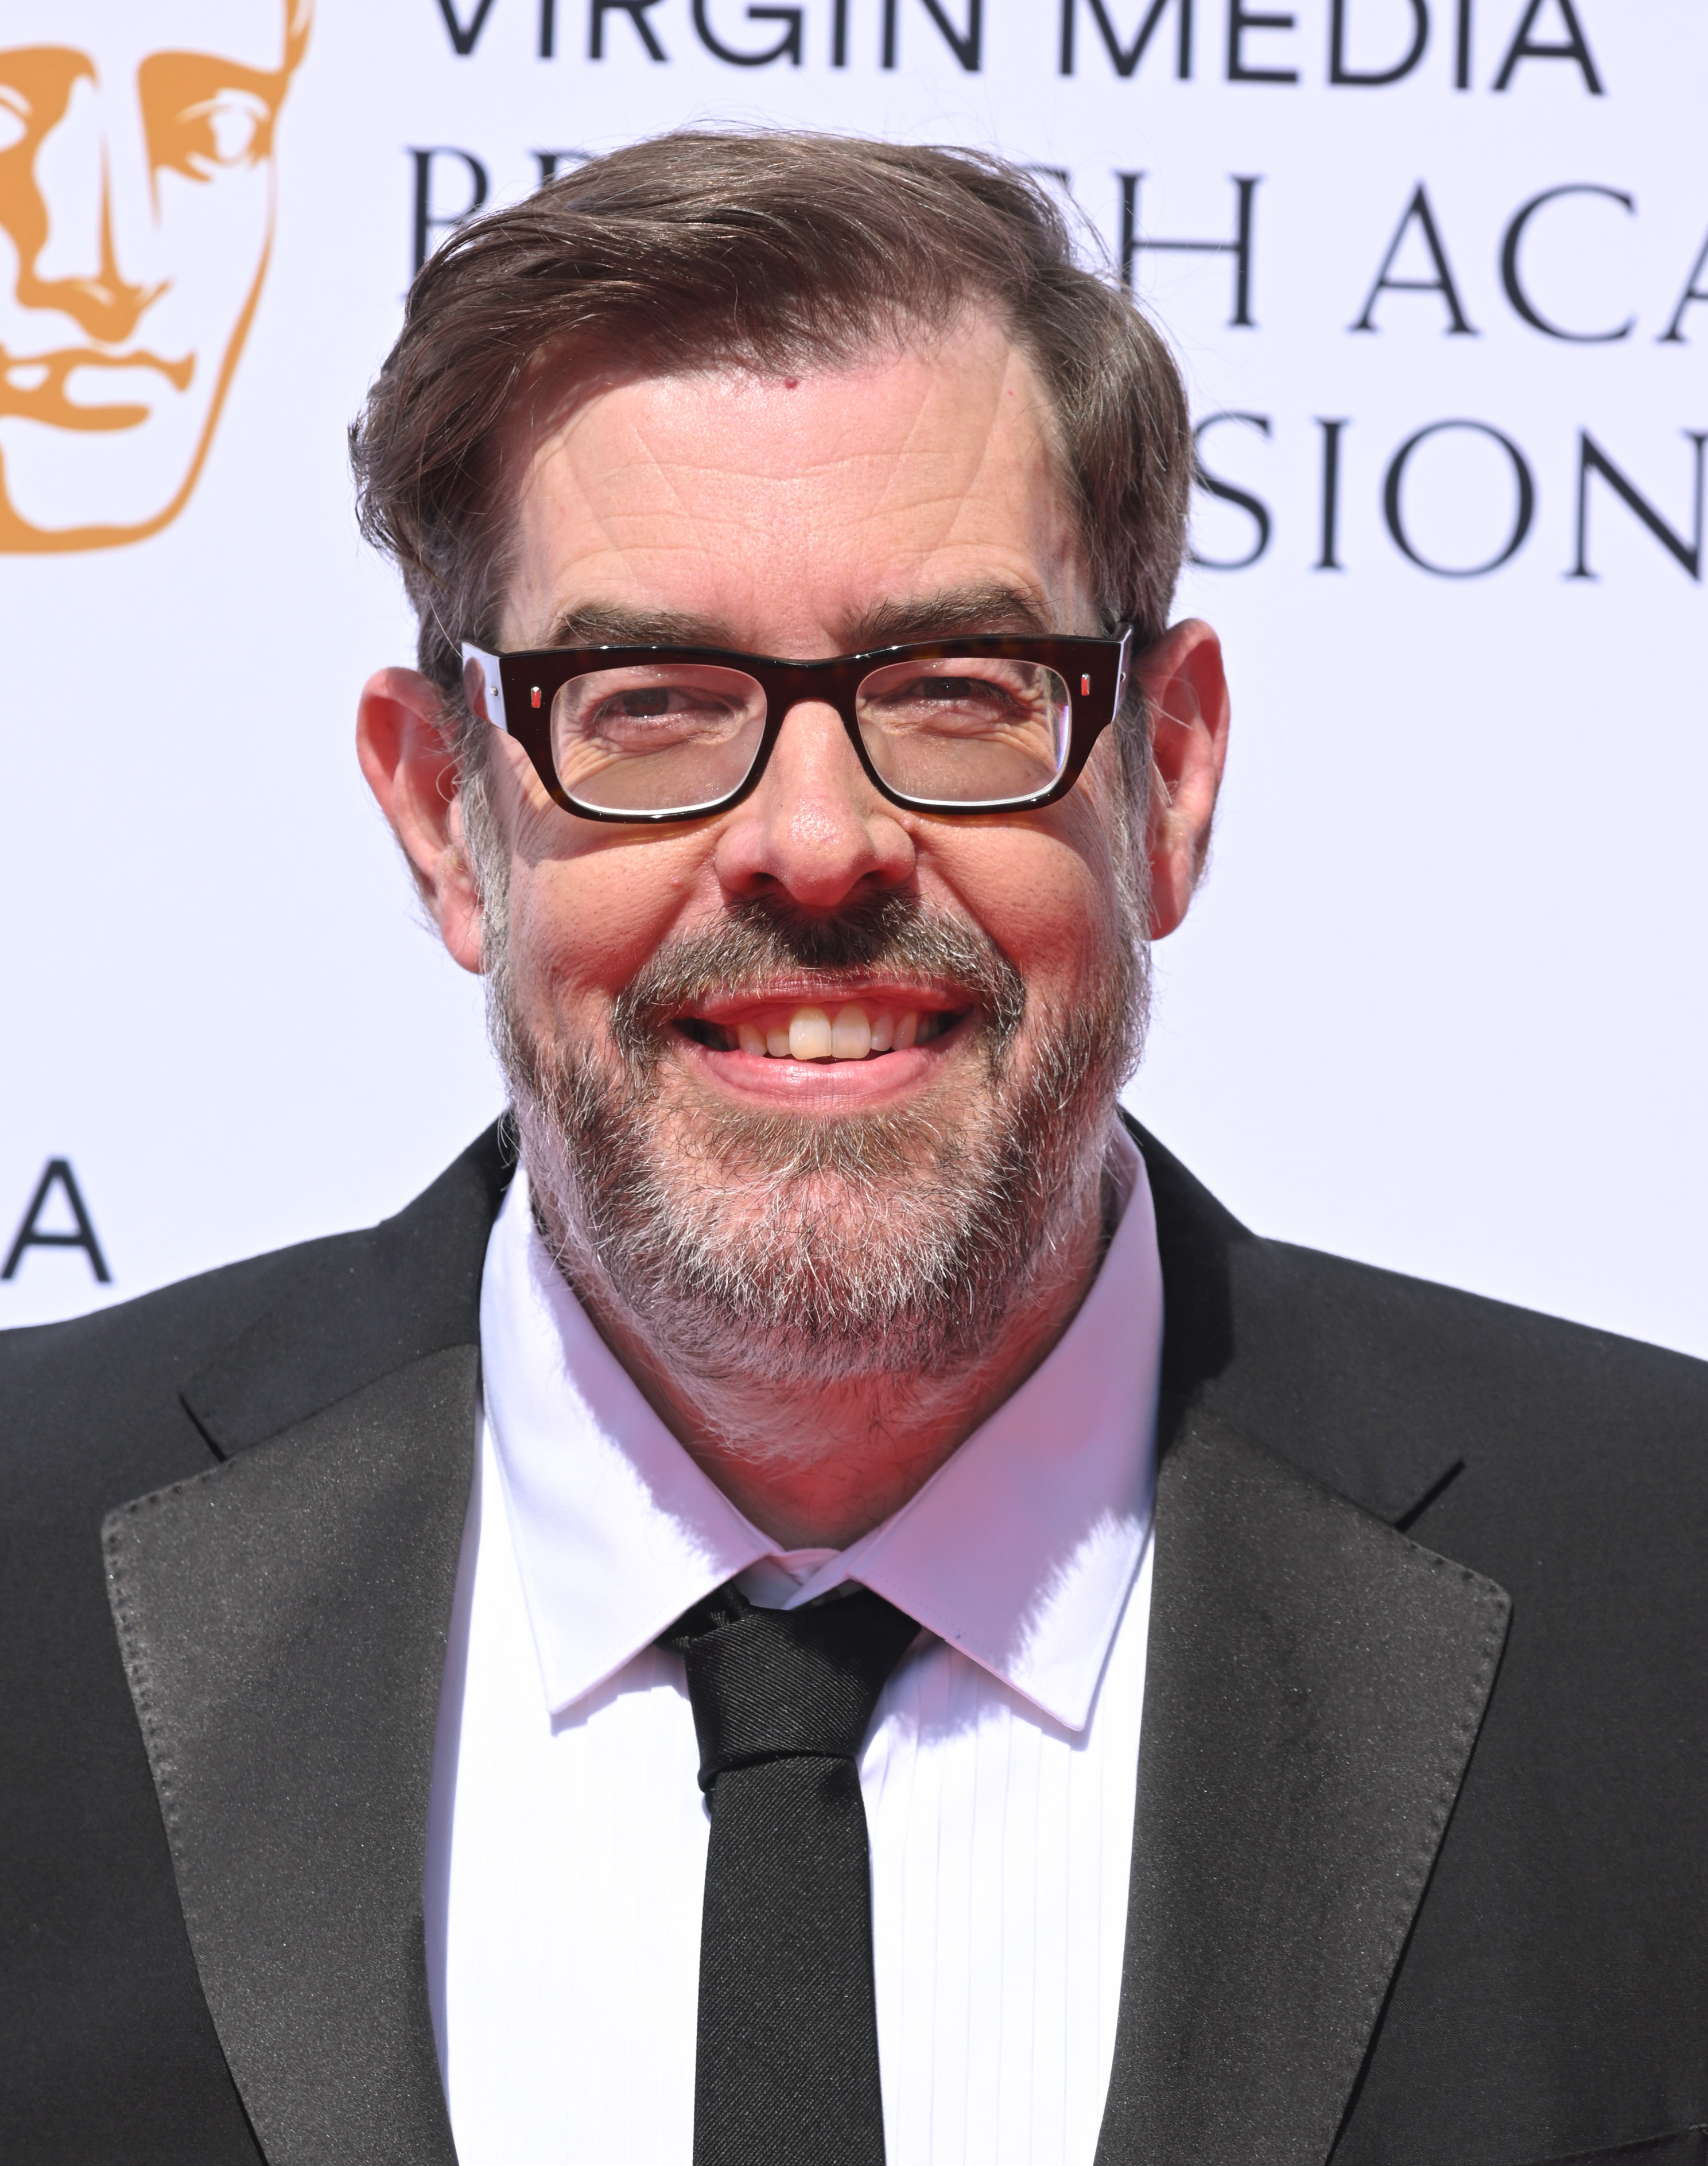 Richard Osman at the Virgin Media British Academy Television Awards in London, England on May 8, 2022 | Source: Getty Images